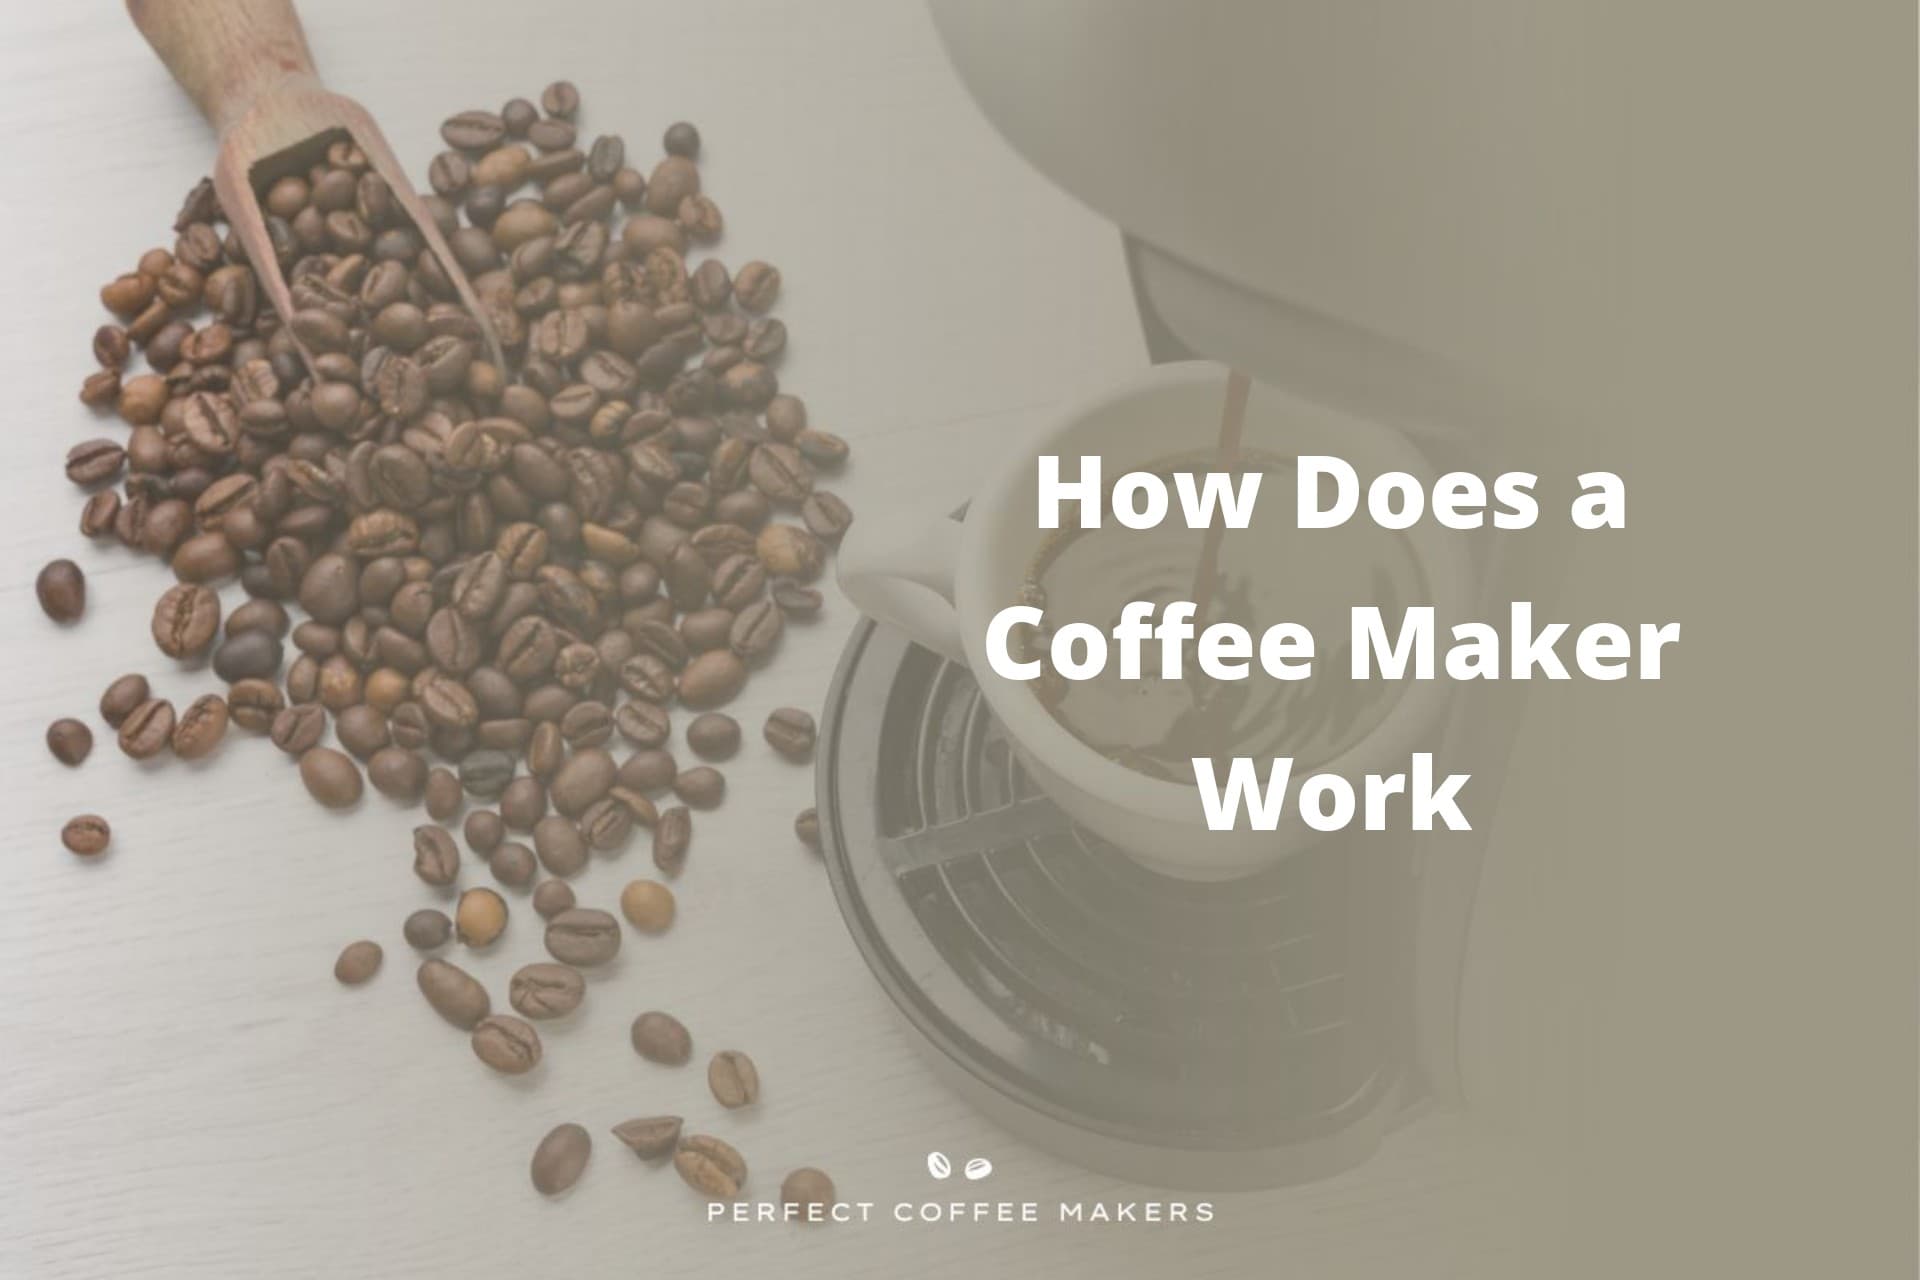 How Does a Coffee Maker Work